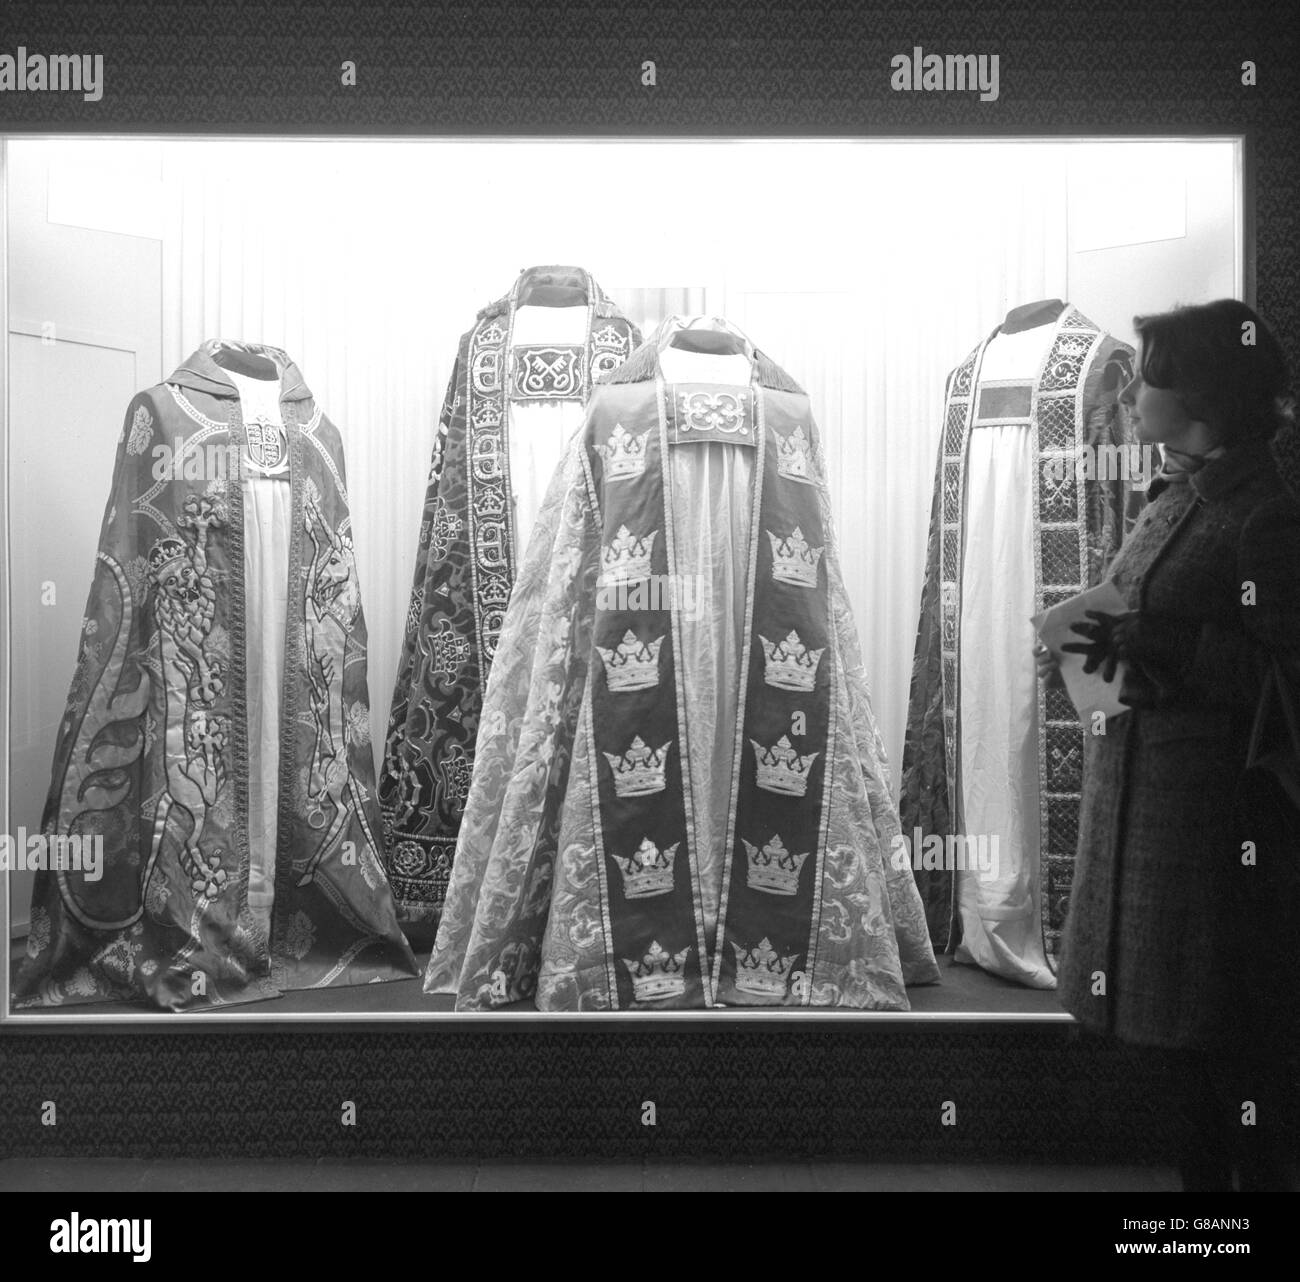 Abbey Treasures Exhibition - Westminster Abbey, London. Ecclesiastical capes on displays at 'The Abbey Treasures' exhibition at Westminster Abbey. Stock Photo